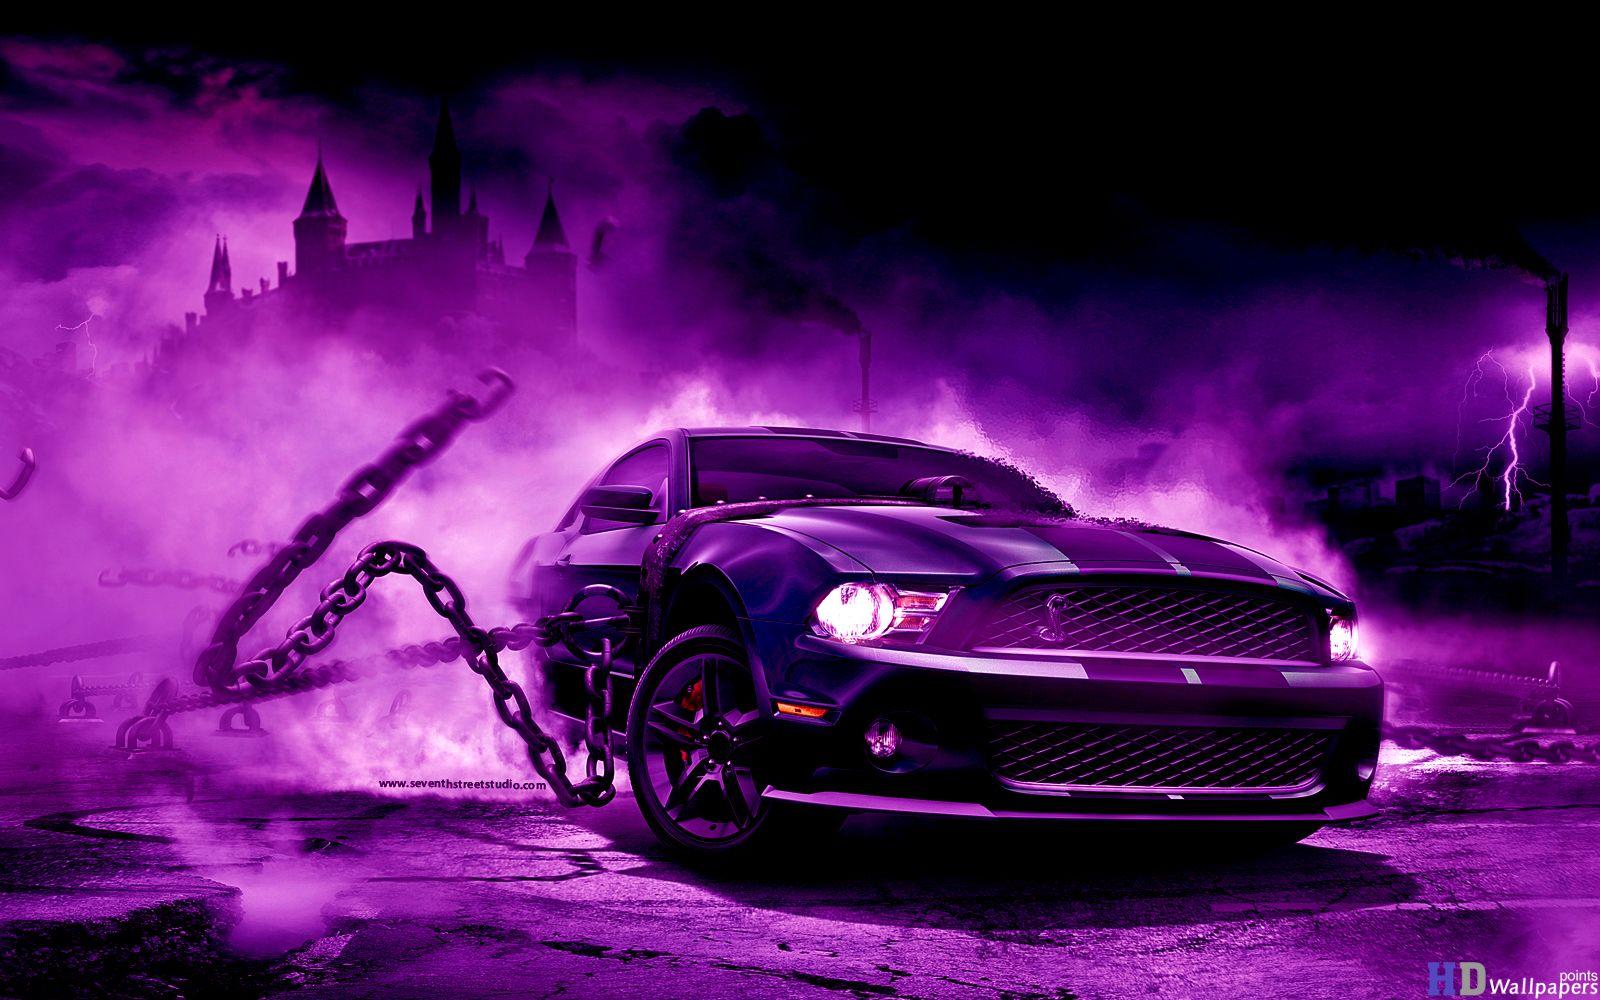 Cool Car Wallpapers, Cool Car Backgrounds for PC